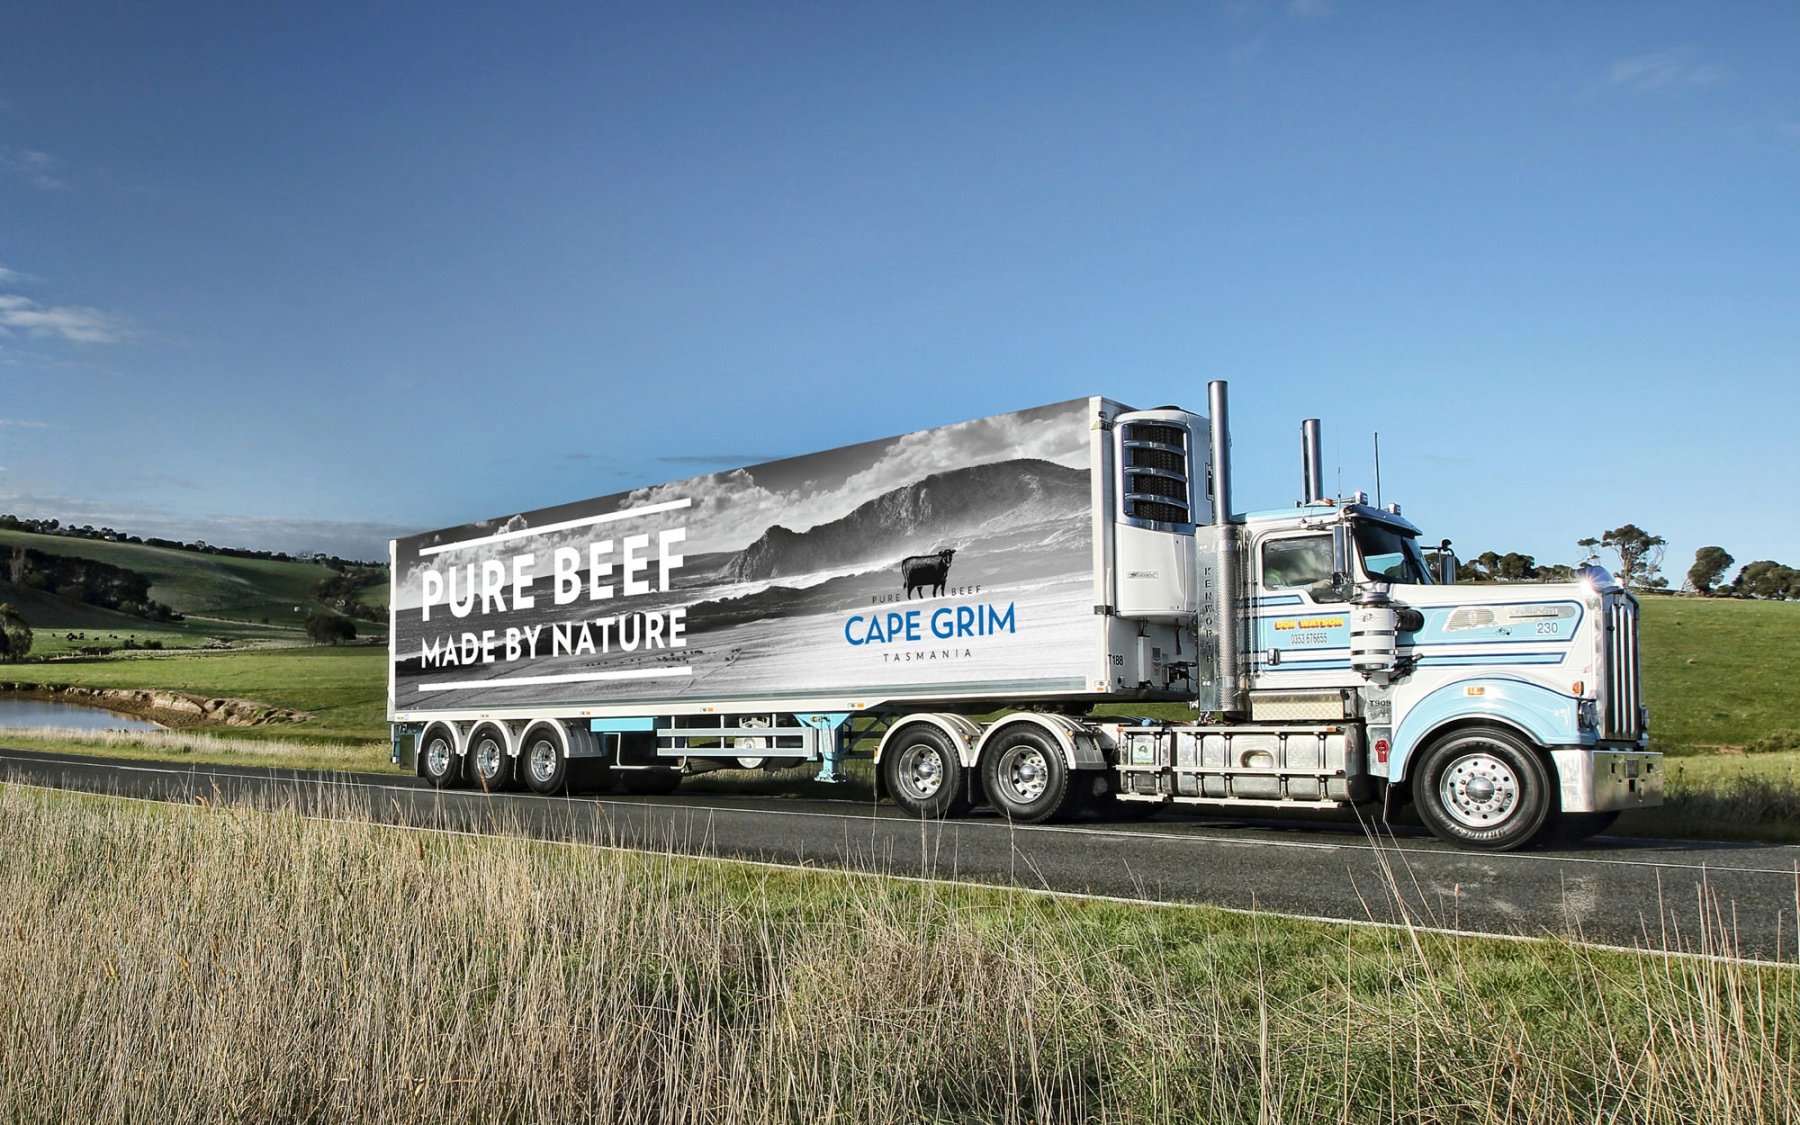 A truck with a billboard on its side driving down the road, showcasing an advertisement of Cape Grim.